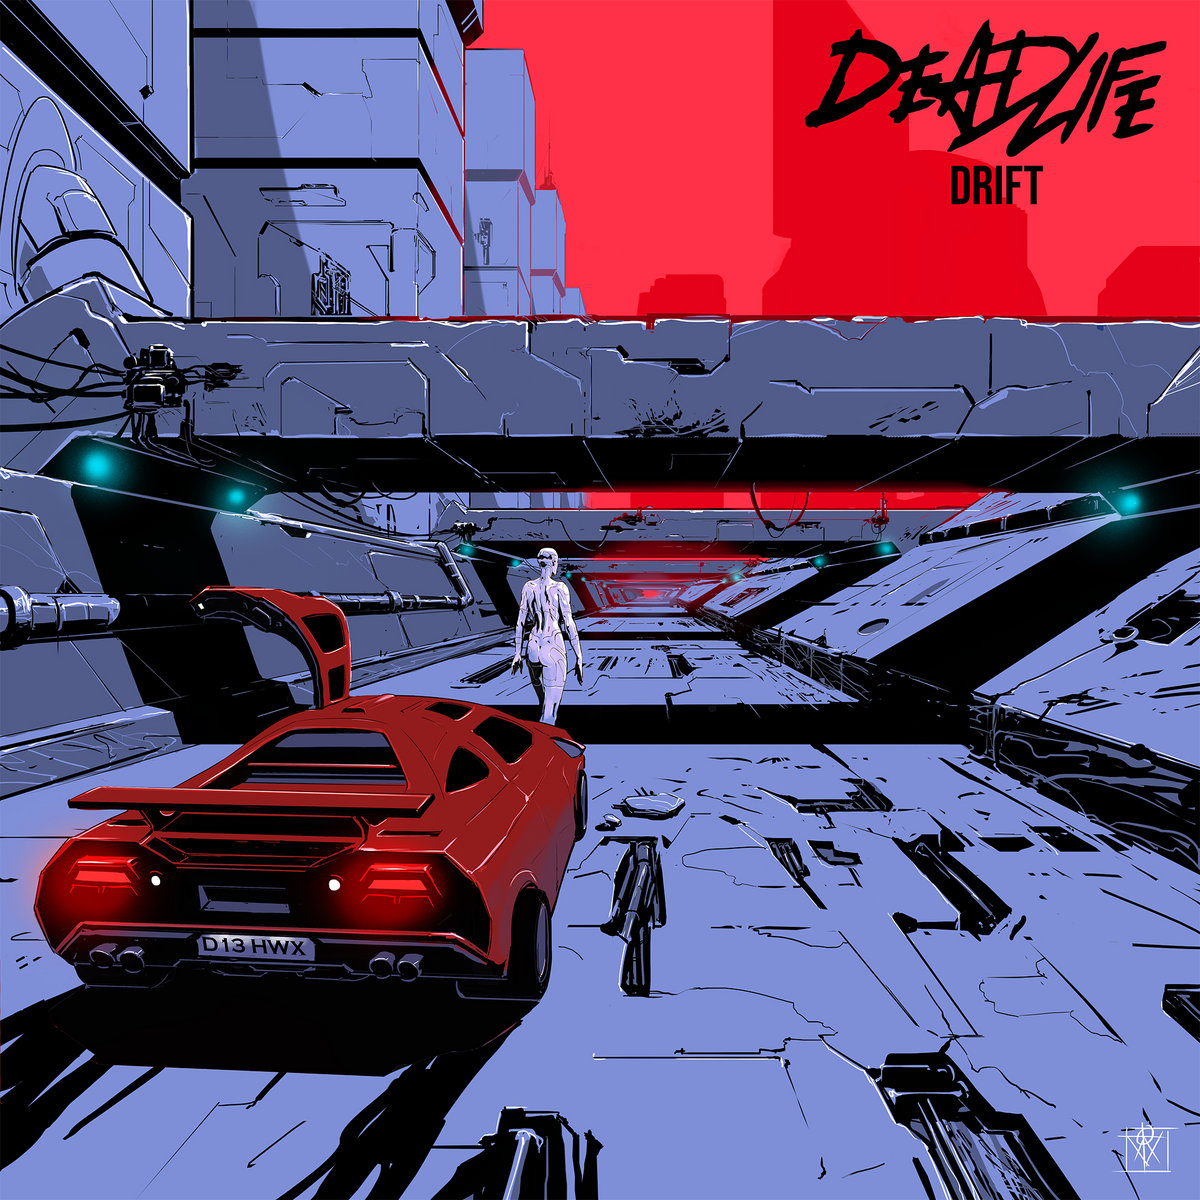 DEADLIFE: The darksynth producer on Manchester’s doorstep is one of music’s best-kept secrets, The Manc